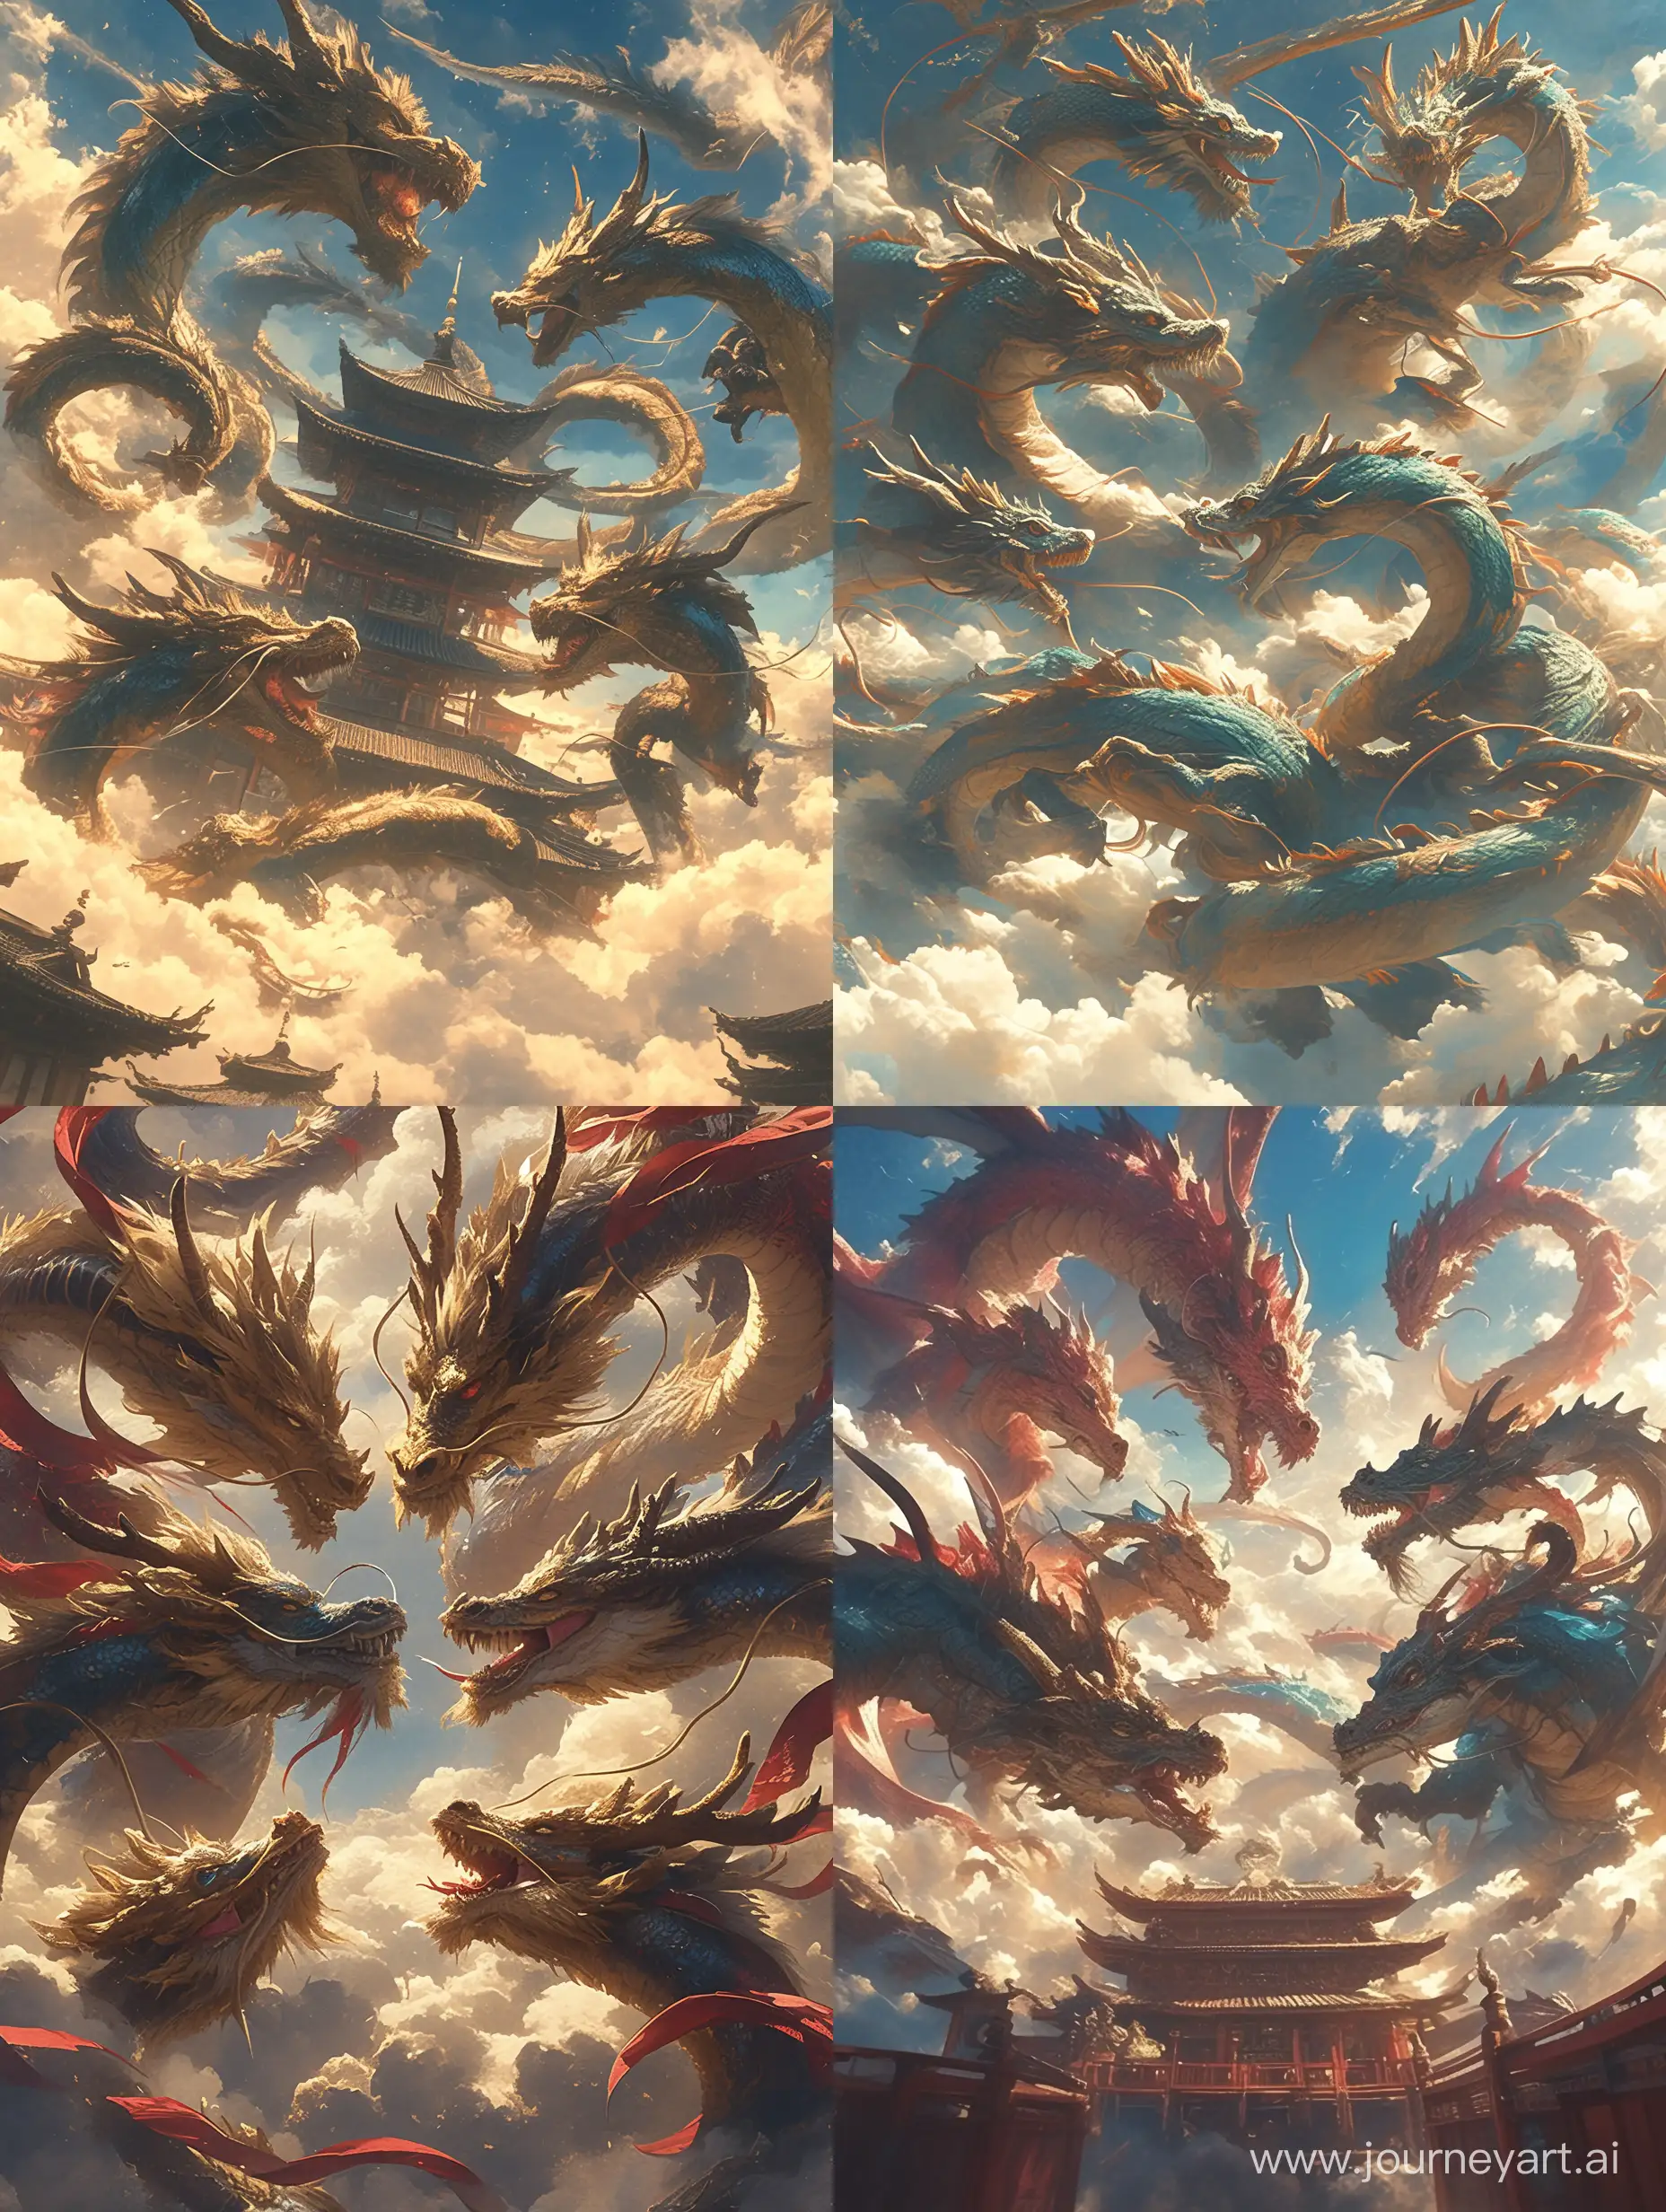 Epic-Battle-of-Five-Dragons-in-Surreal-Clouds-AsianInspired-CG-Fantasy-Art